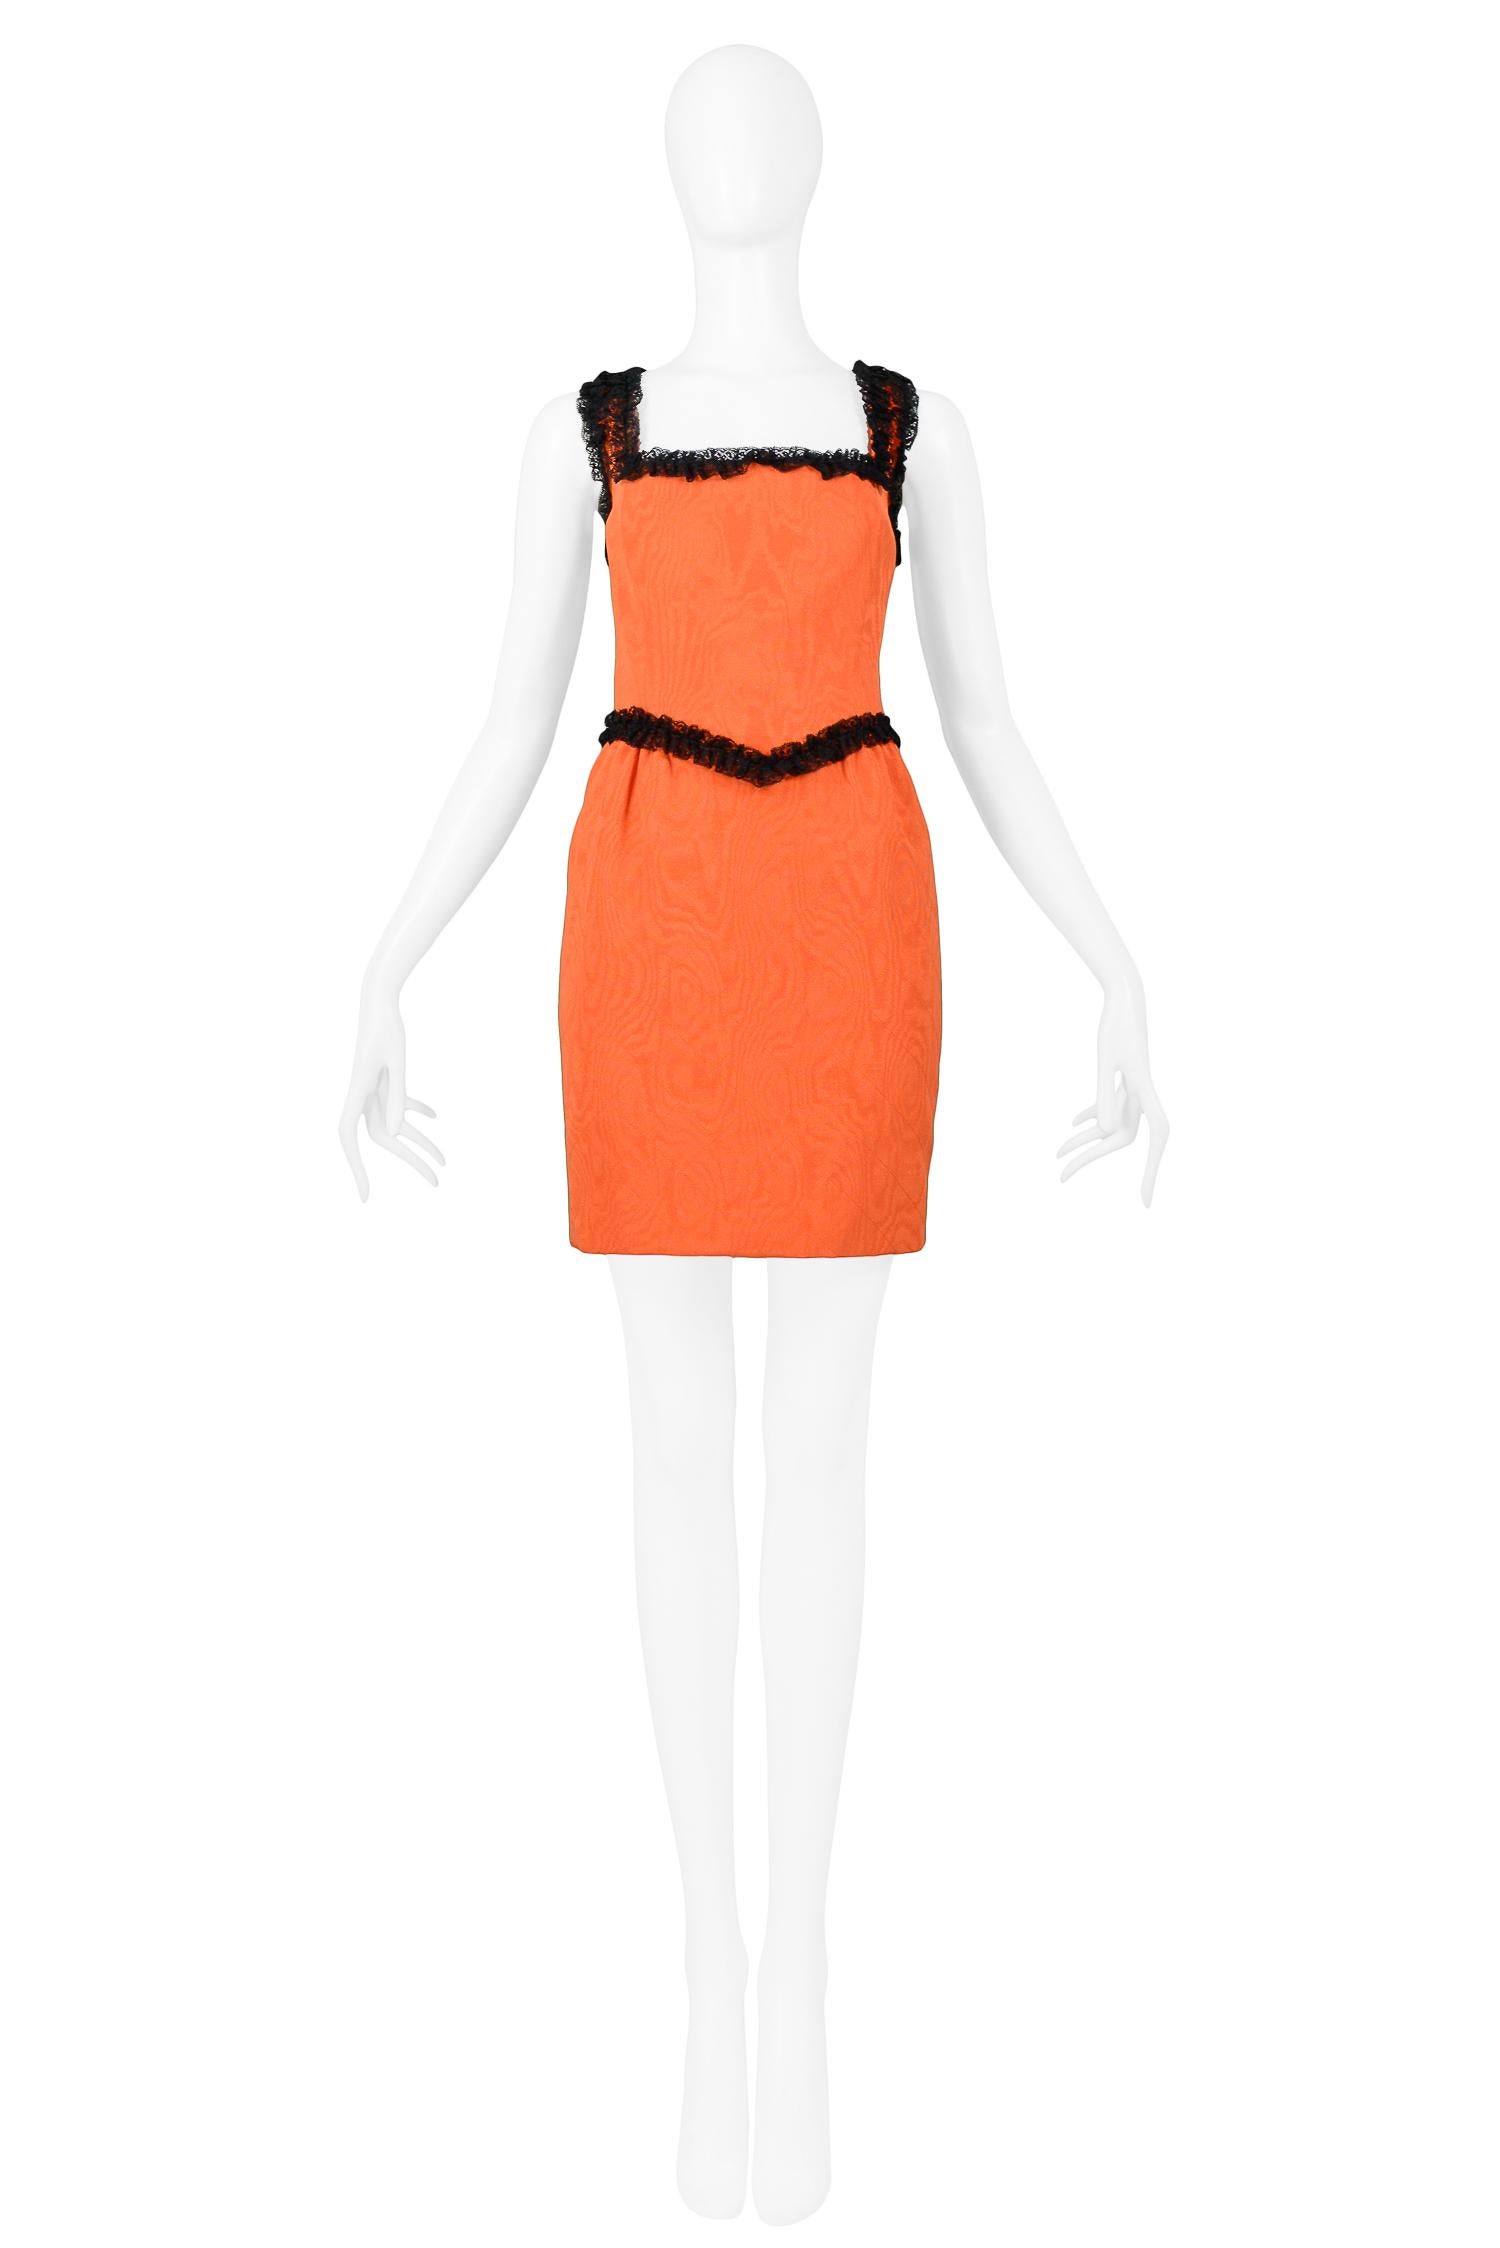 Resurrection Vintage is excited to offer a vintage orange Moschino Couture by Franco Moschino cotton rayon blend mini dress: featuring moire faille fabric, black lace trim, and center back zipper.

Moschino
Size 40
51% Cotton, 49% Rayon
Excellent